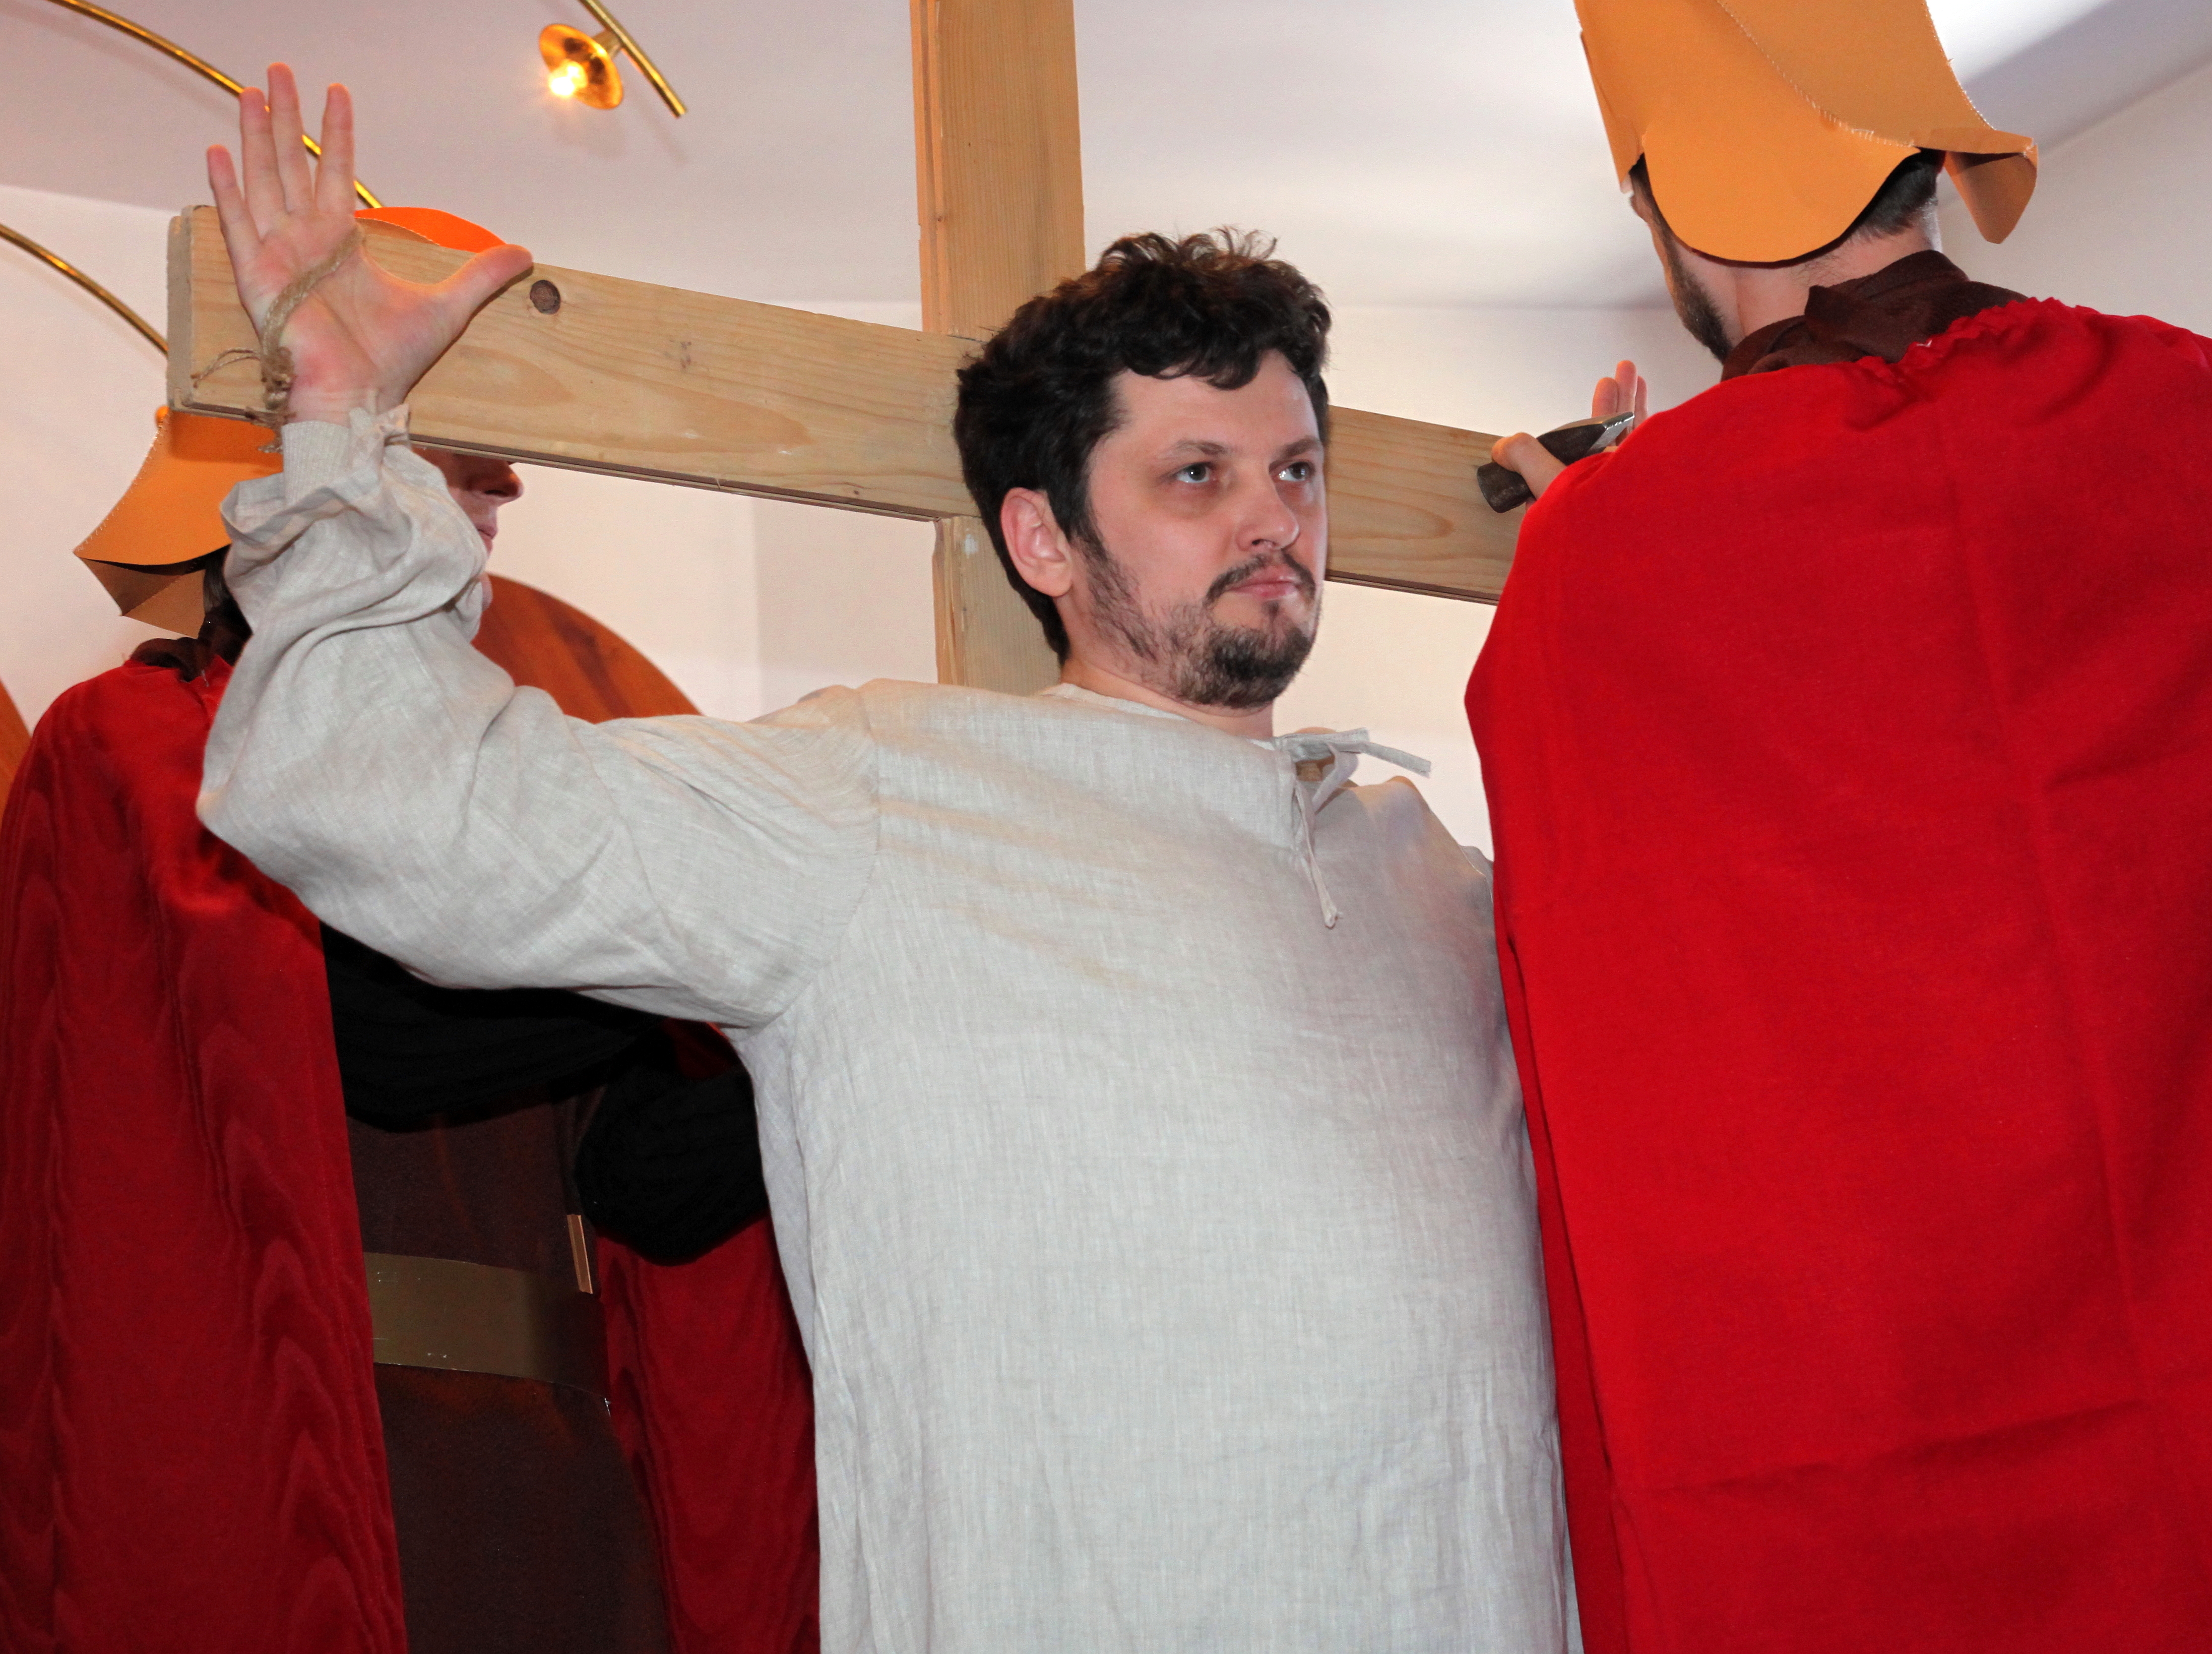 Jesus being crucified in the Passion of the Christ performance, photo 1